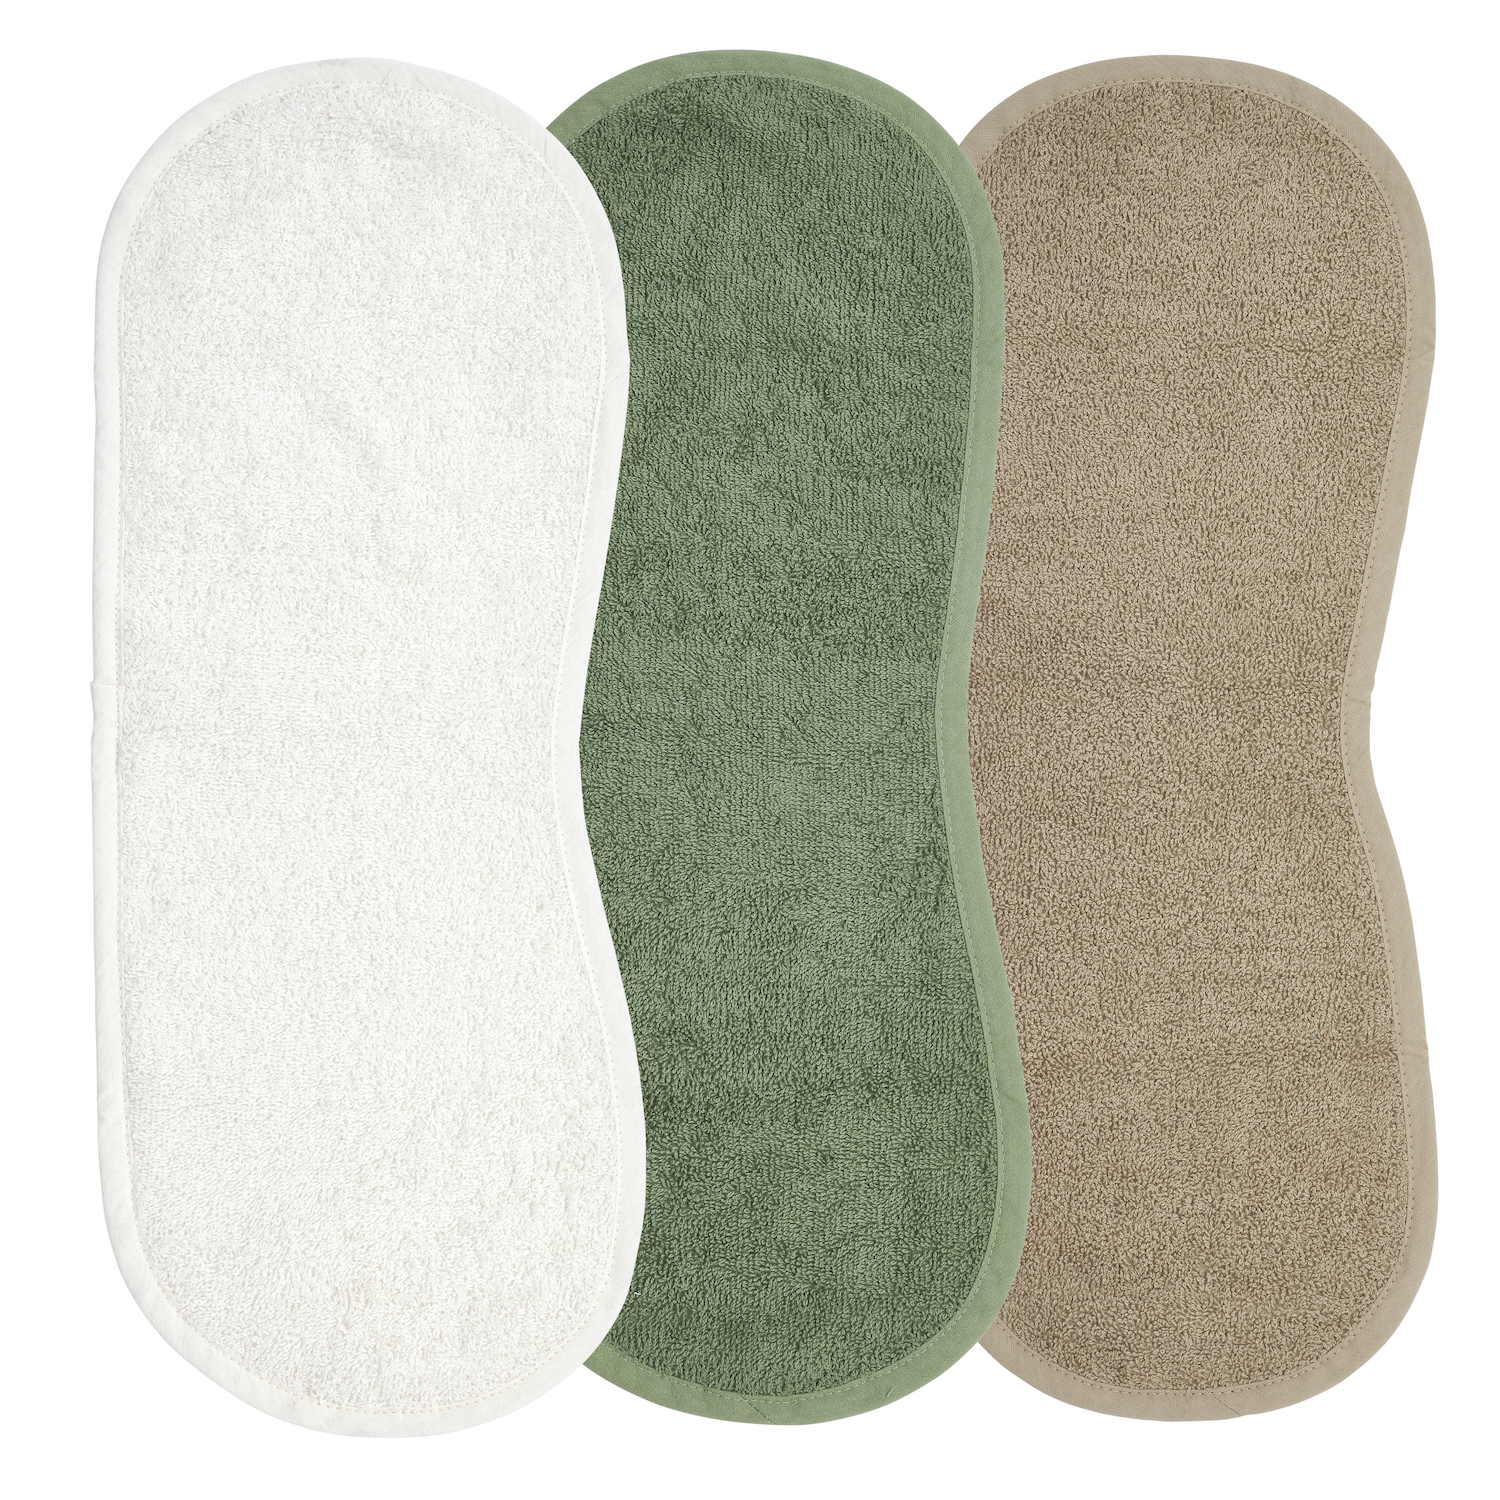 Basic Terry Burp Cloths Shoulder Model 3-pack  - Offwhite/Forest Green/Taupe - 53x20cm